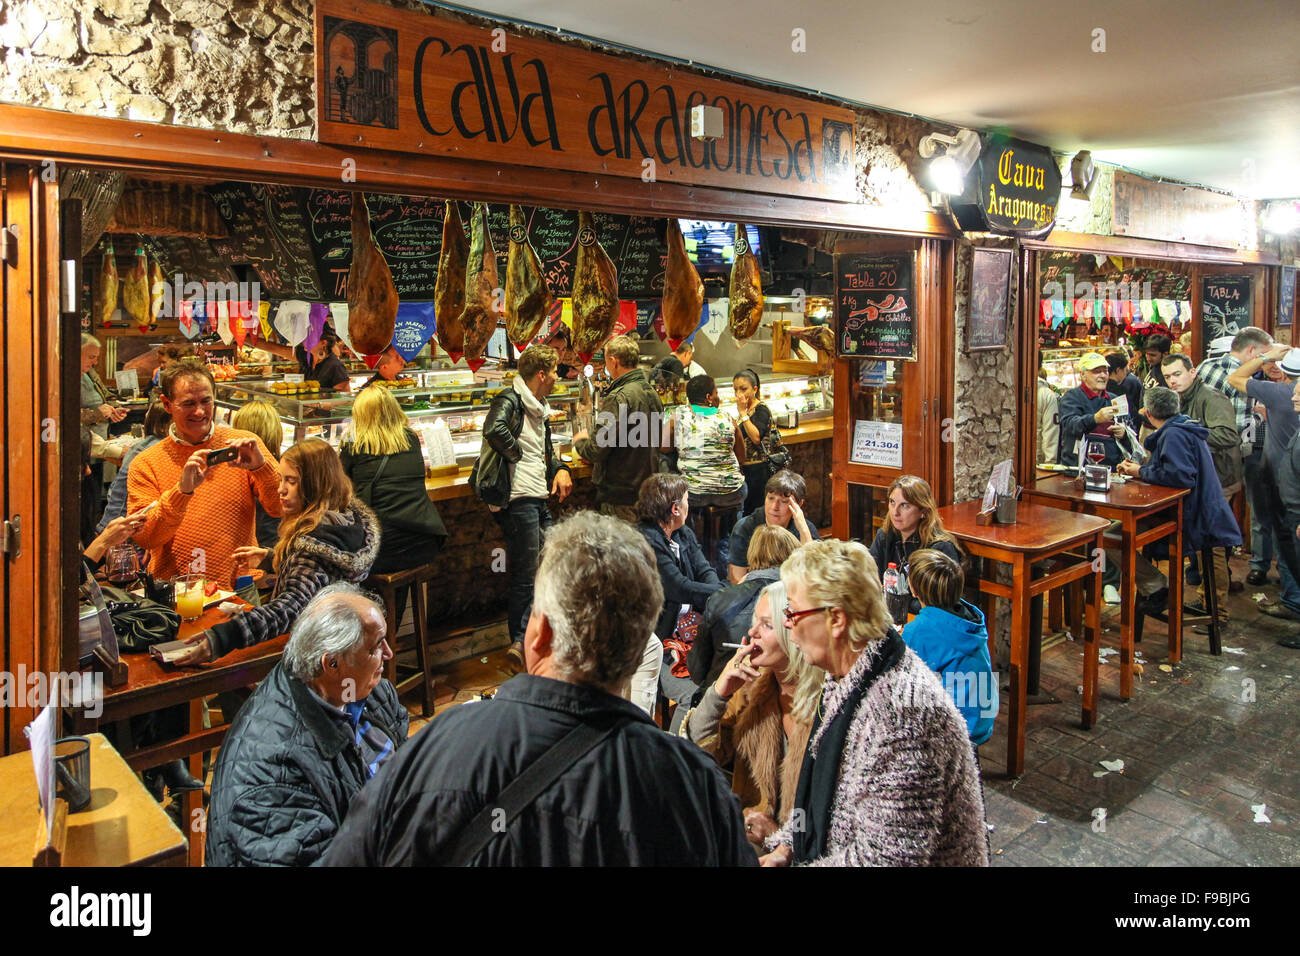 Cava Aragonesa, Tapas Bar and restaurant in the Old Town with customers dining and smoking. Stock Photo